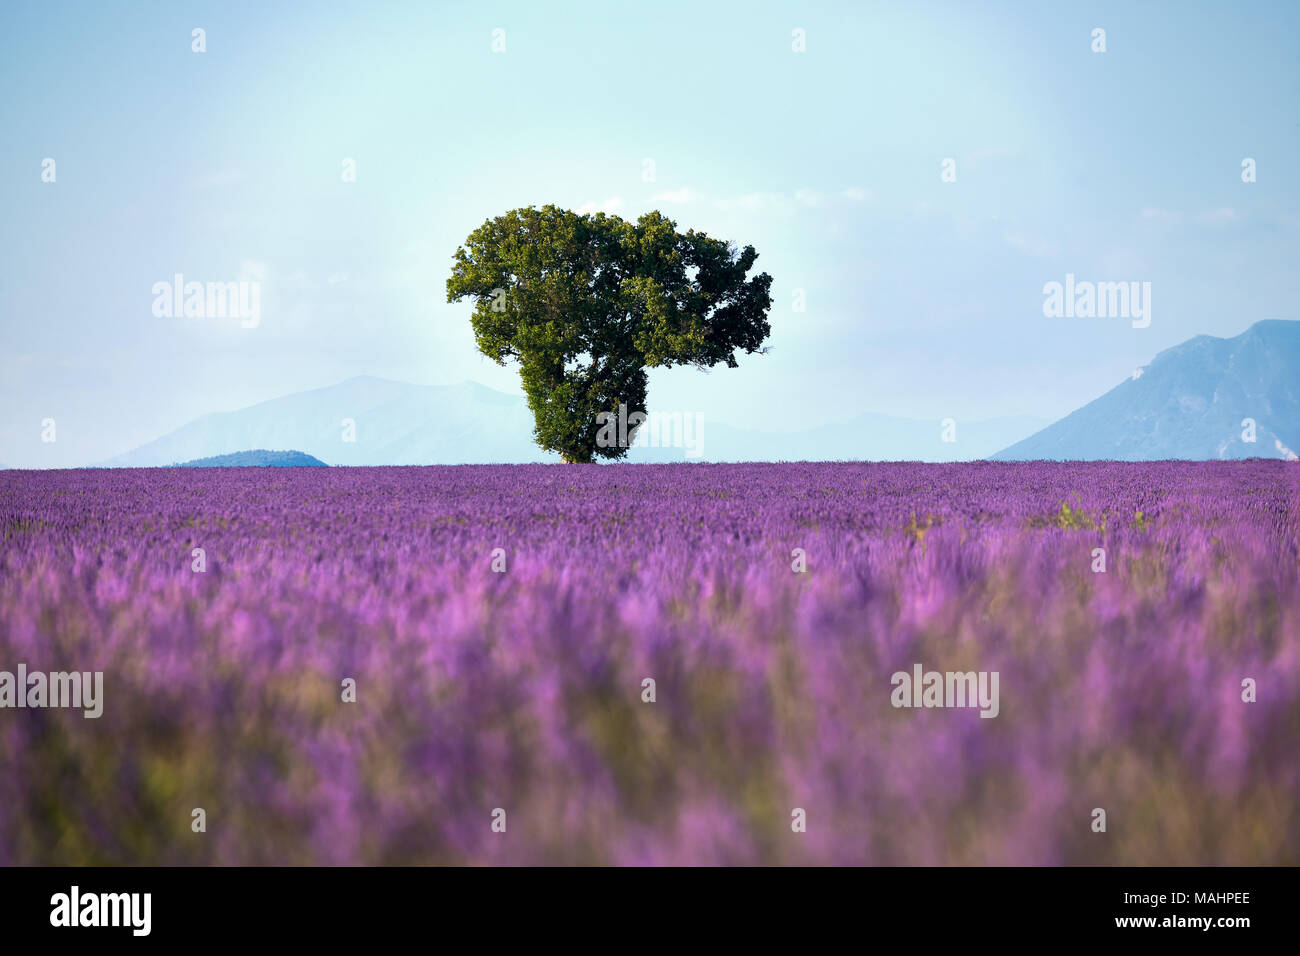 lonely tree in the middle of a field full of flowers of lavender Stock Photo